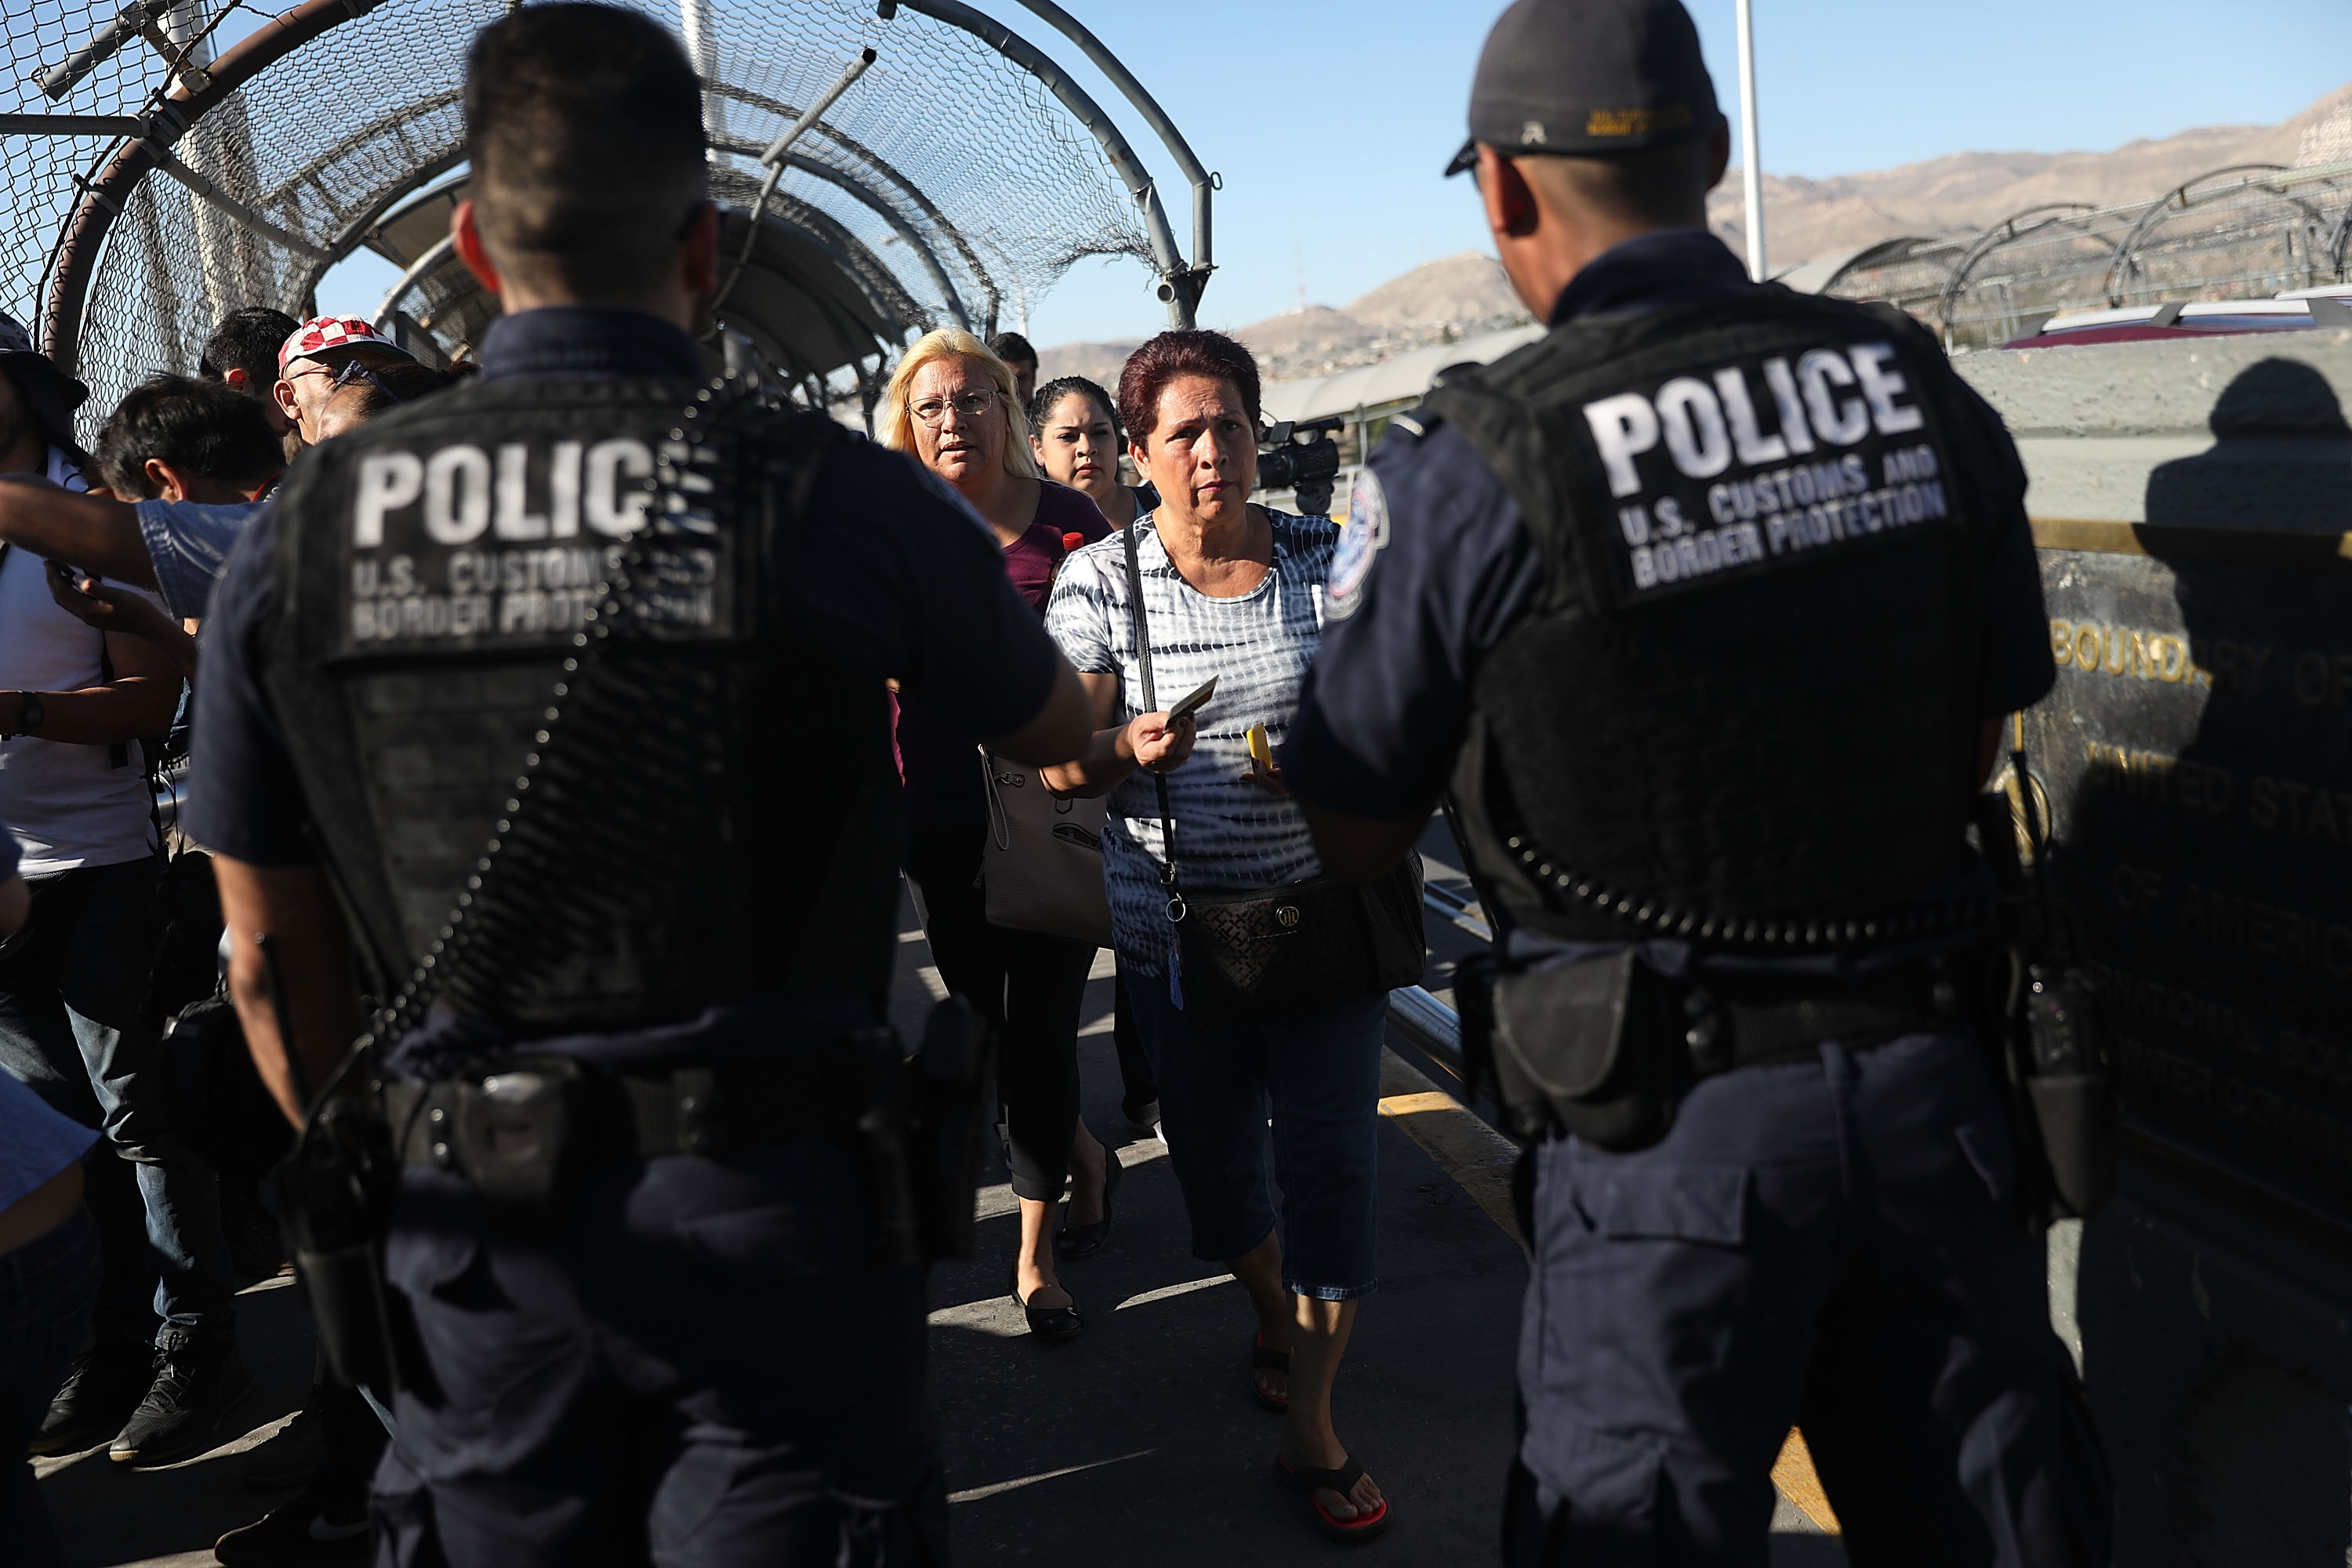 U.S. Border Patrol agents check passports at the Paso Del Norte Port of Entry, where the U.S. and Mexico border meet, as people walk across the bridge to enter the United States on June 20, 2018 in El Paso, Texas. (Joe Raedle—Getty Images)